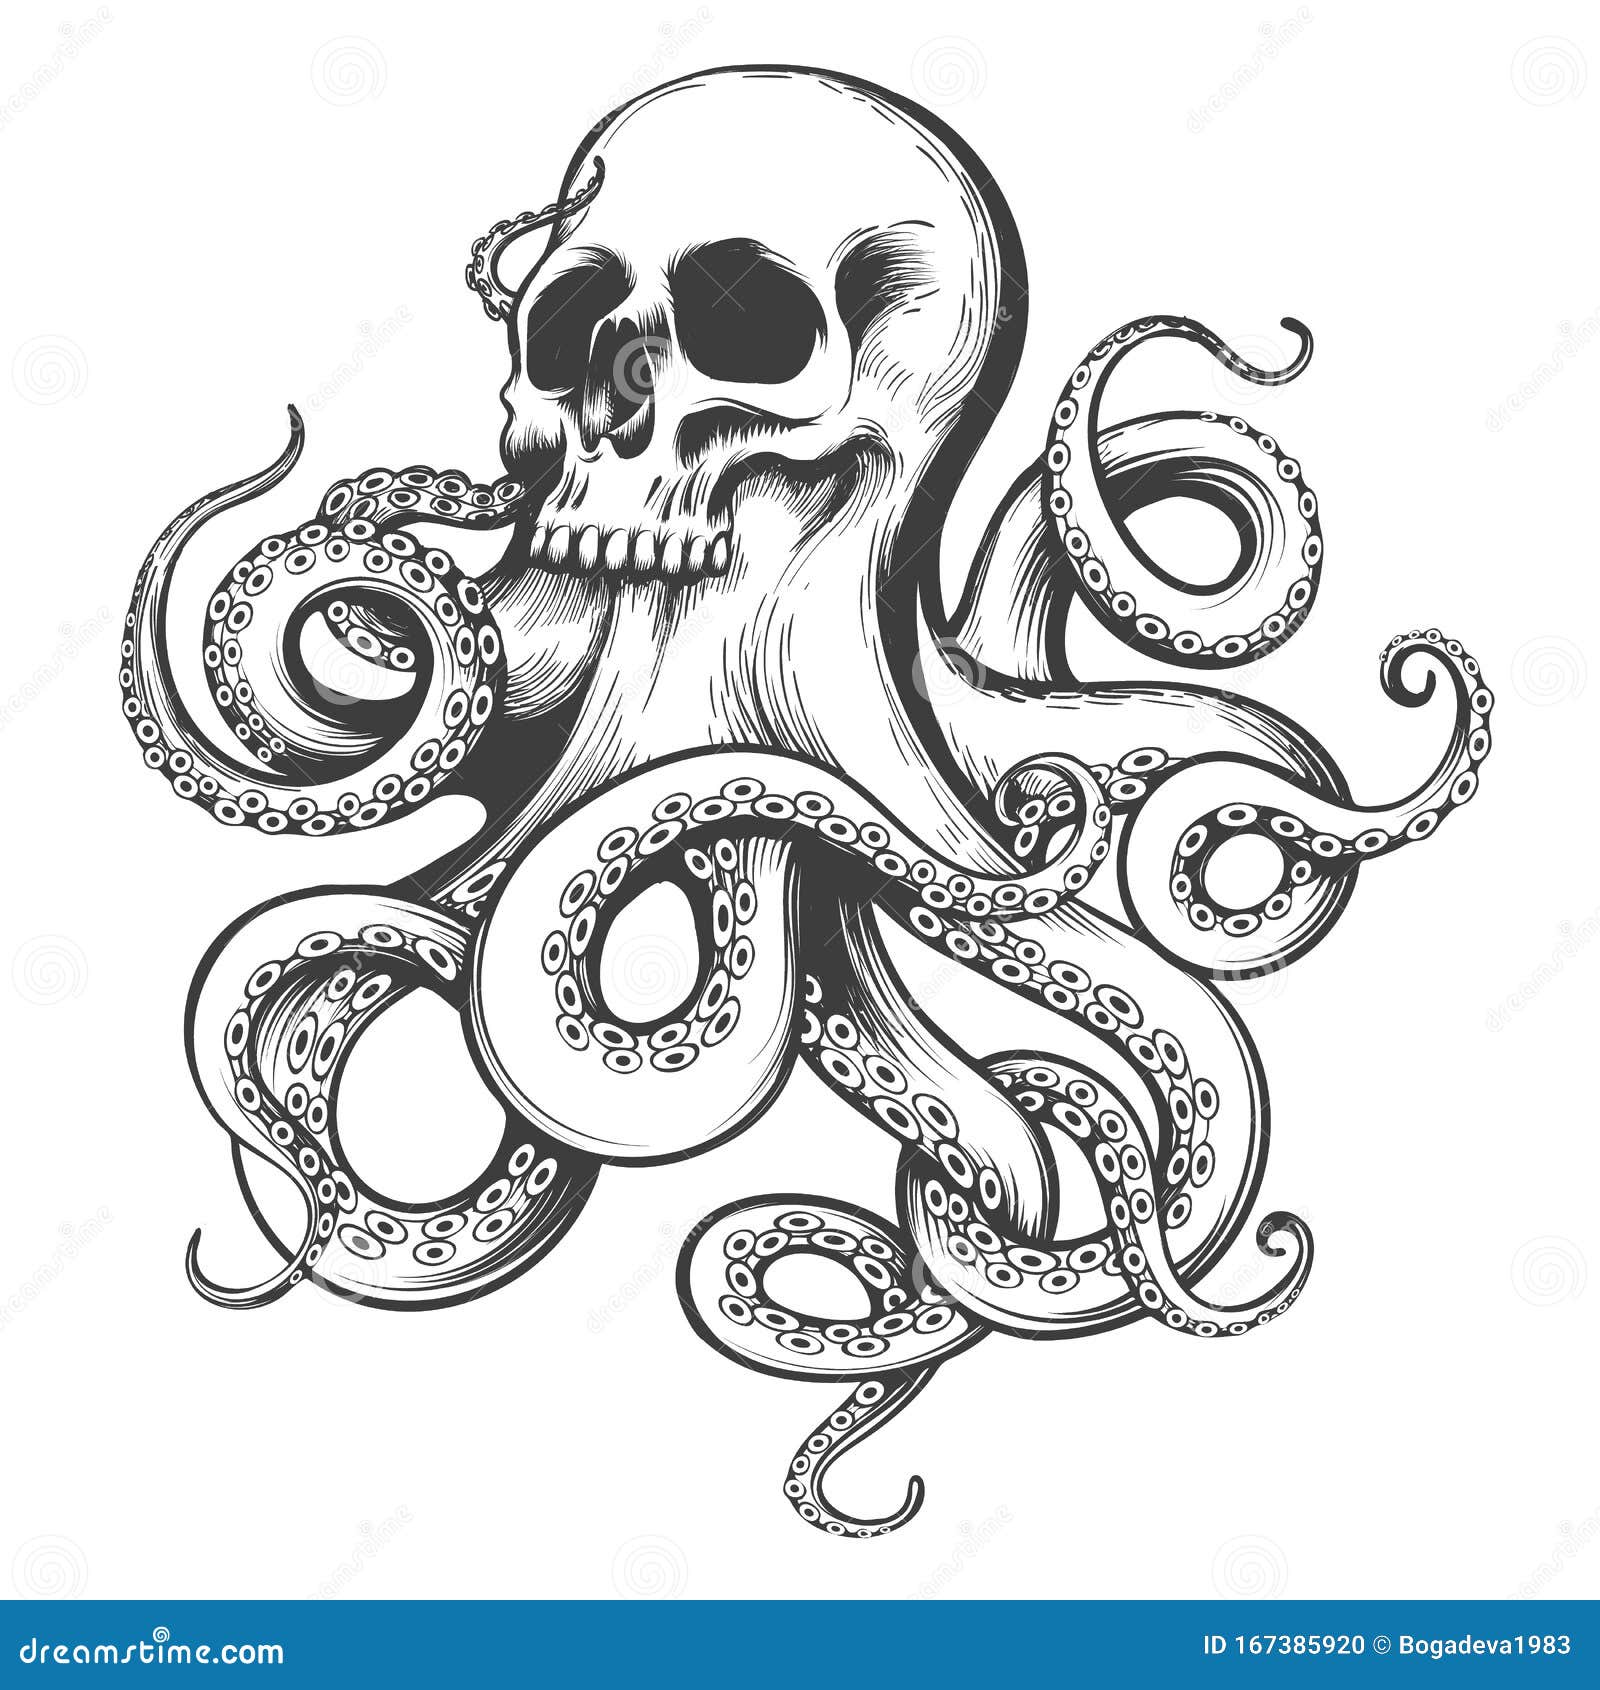 Octopus Tattoo Design and Meaning  95 Ideas